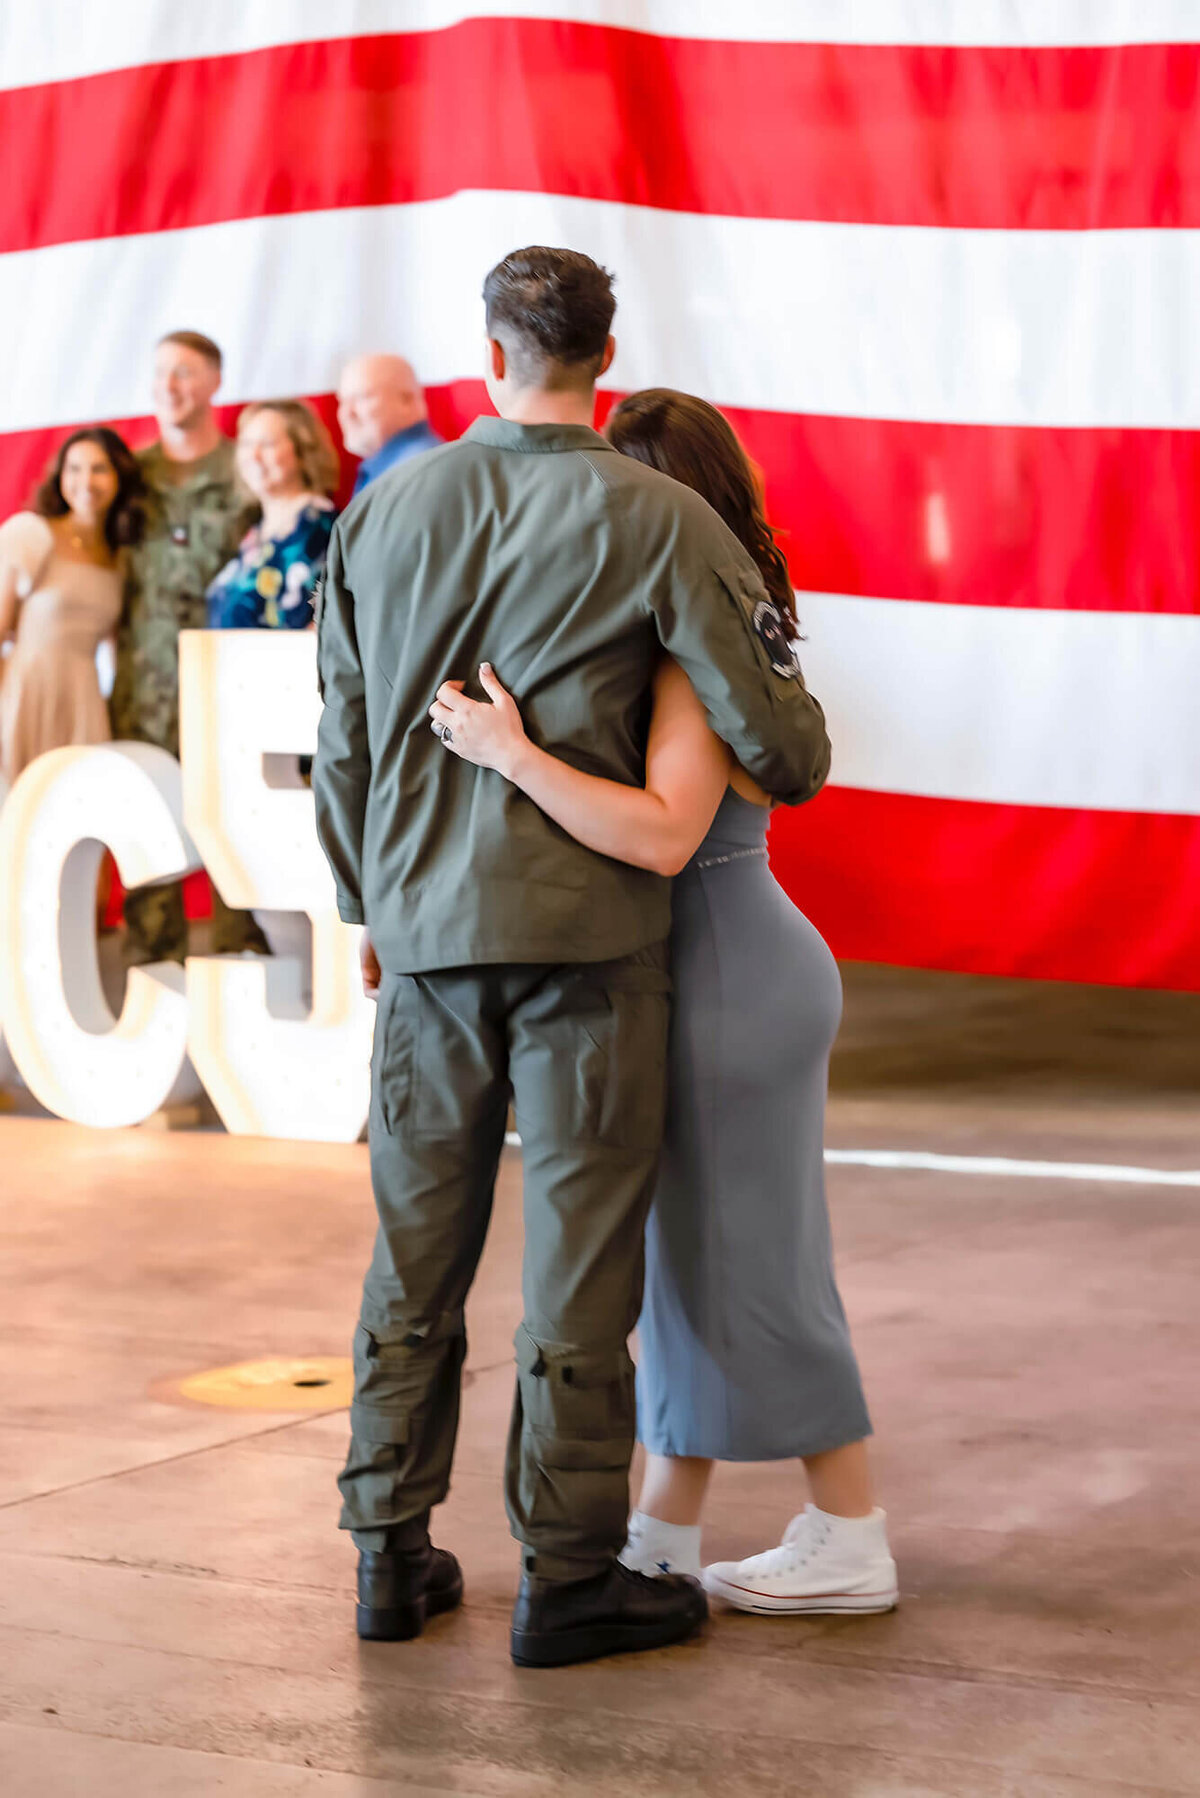 A couple snuggles close at a military homecoming. They watch as other families get their pictures taken with the American flag and squadron sign.